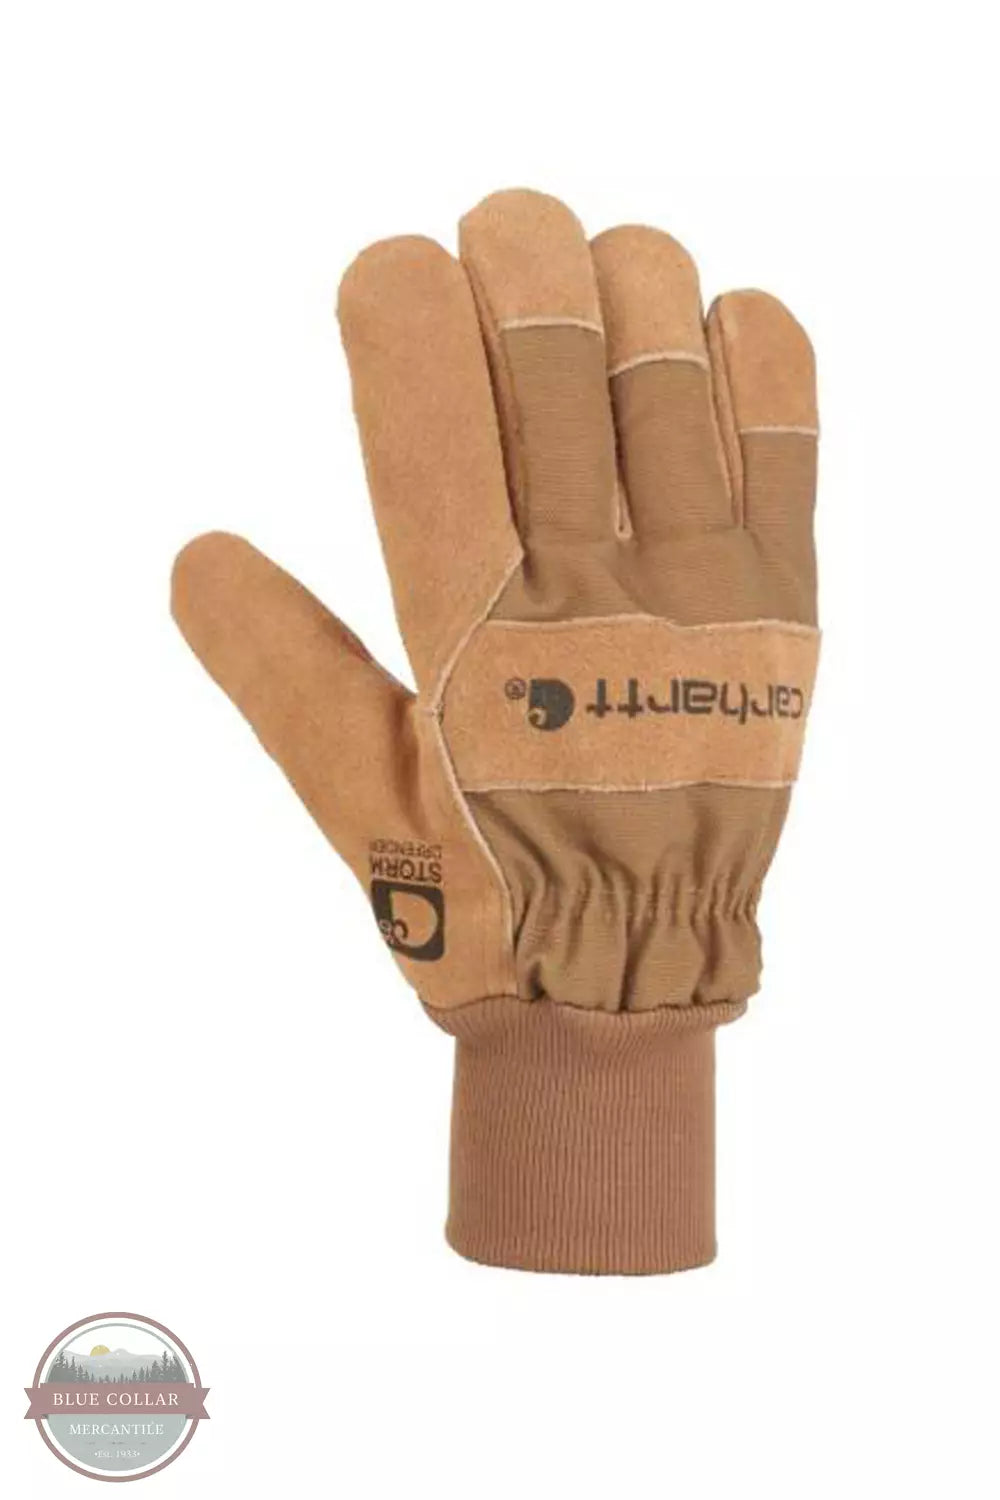 Carhartt A705 Insulated Grain Leather Work Gloves Top View